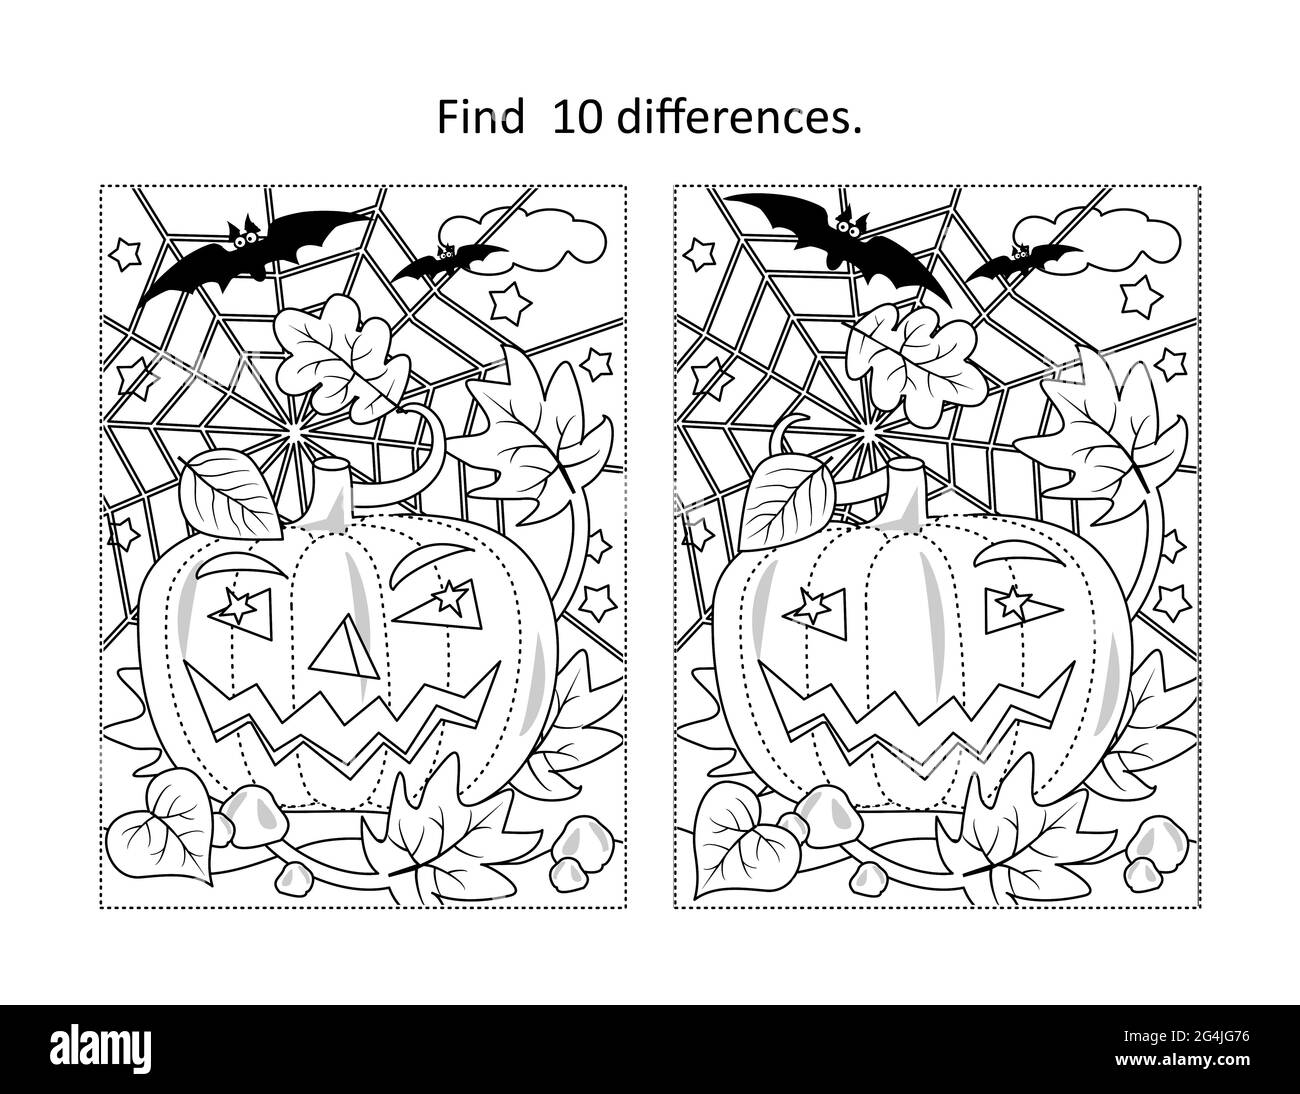 Find 10 differences visual puzzle and coloring page with Halloween pumpkin, bats, spiderweb Stock Photo